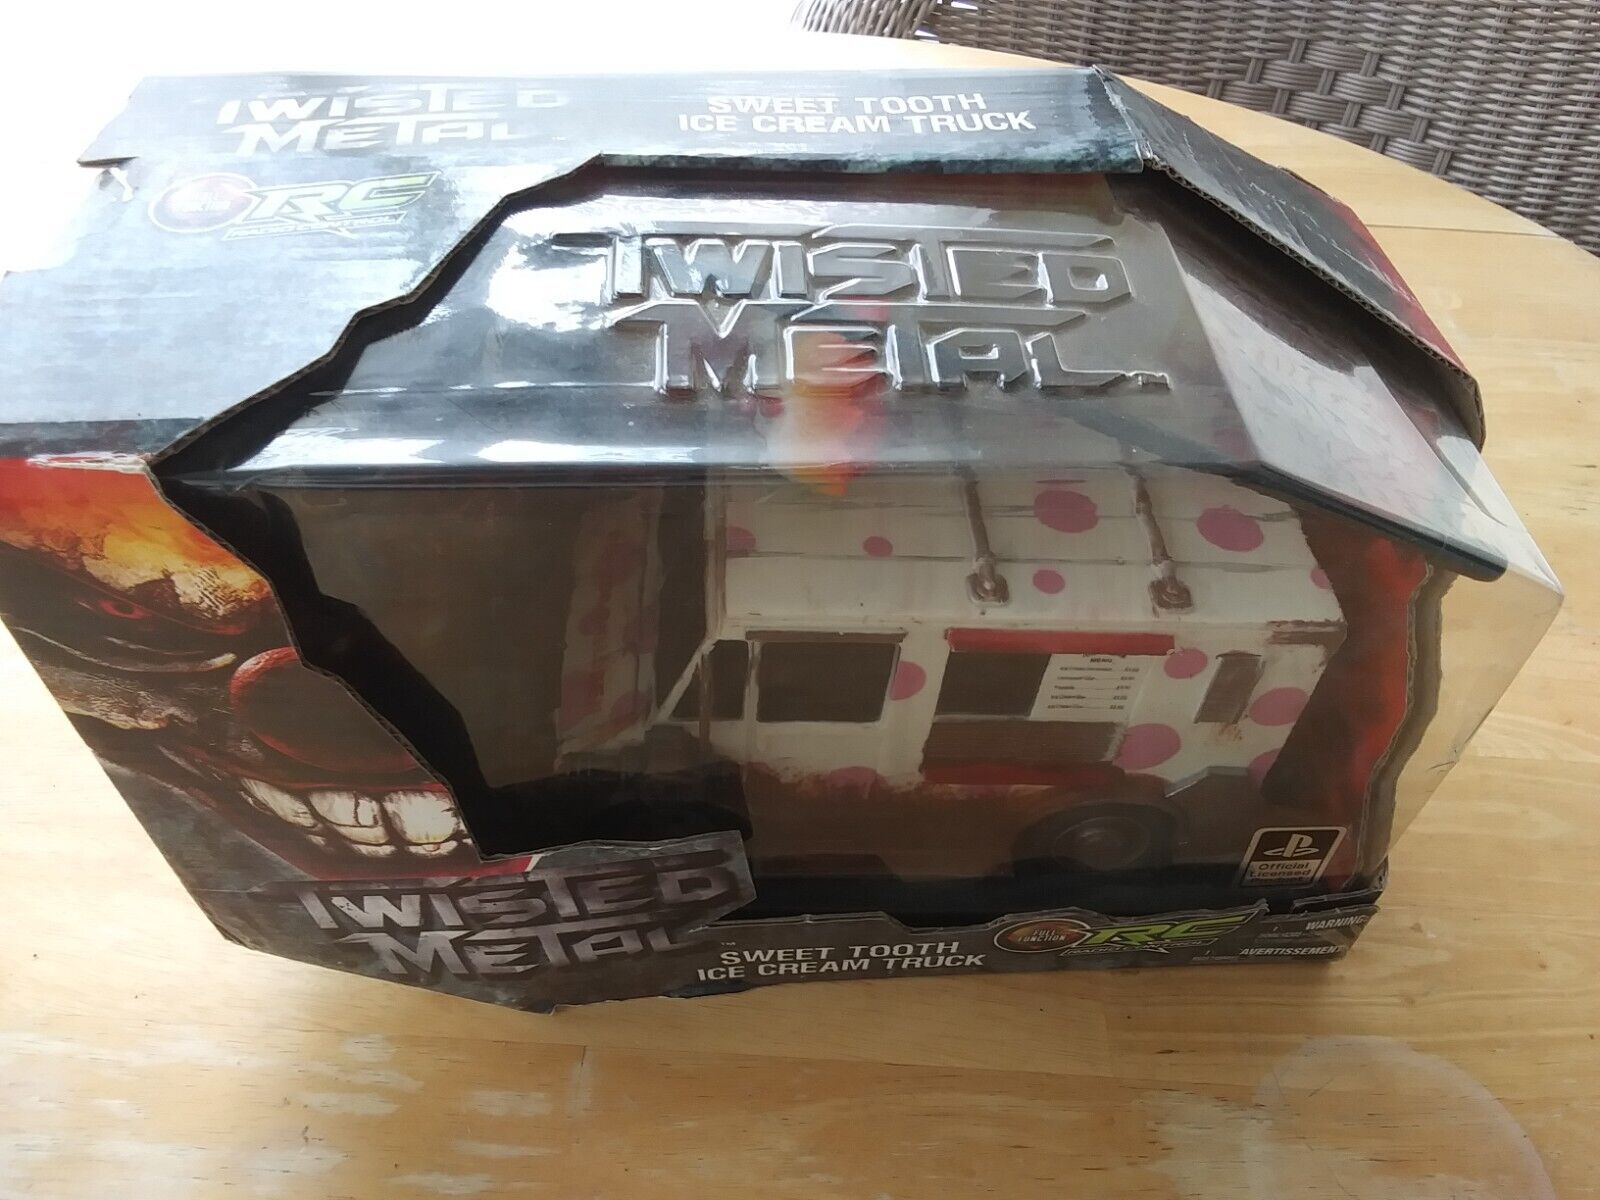 Playstation twisted metal rc sweet tooth ice cream truck